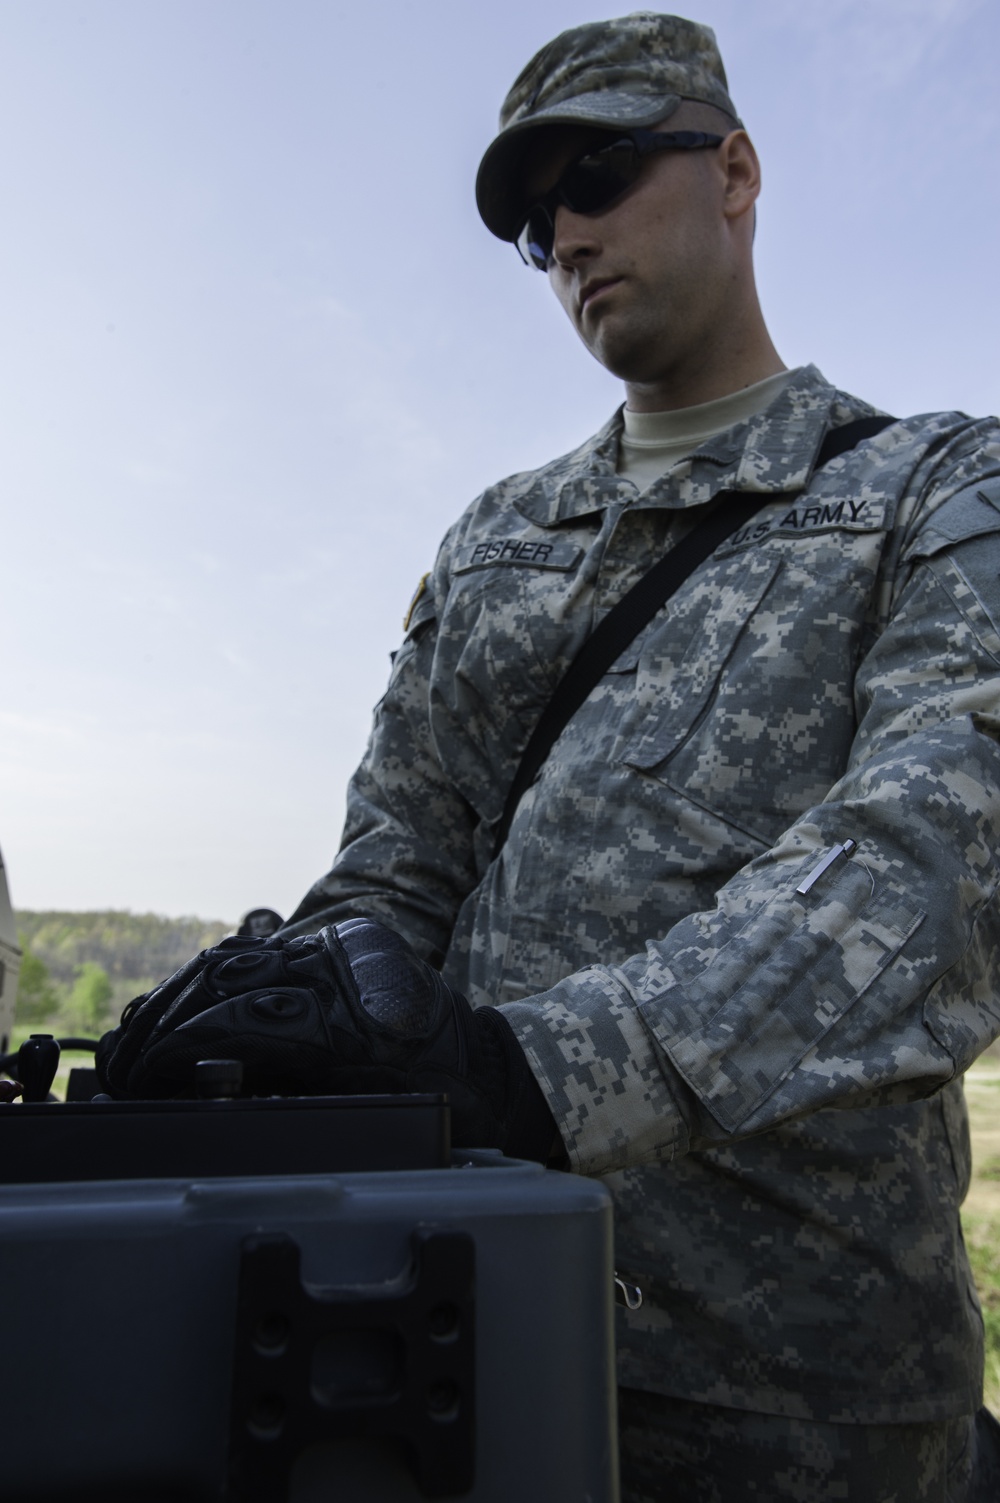 818th Engineer Company route clearance training